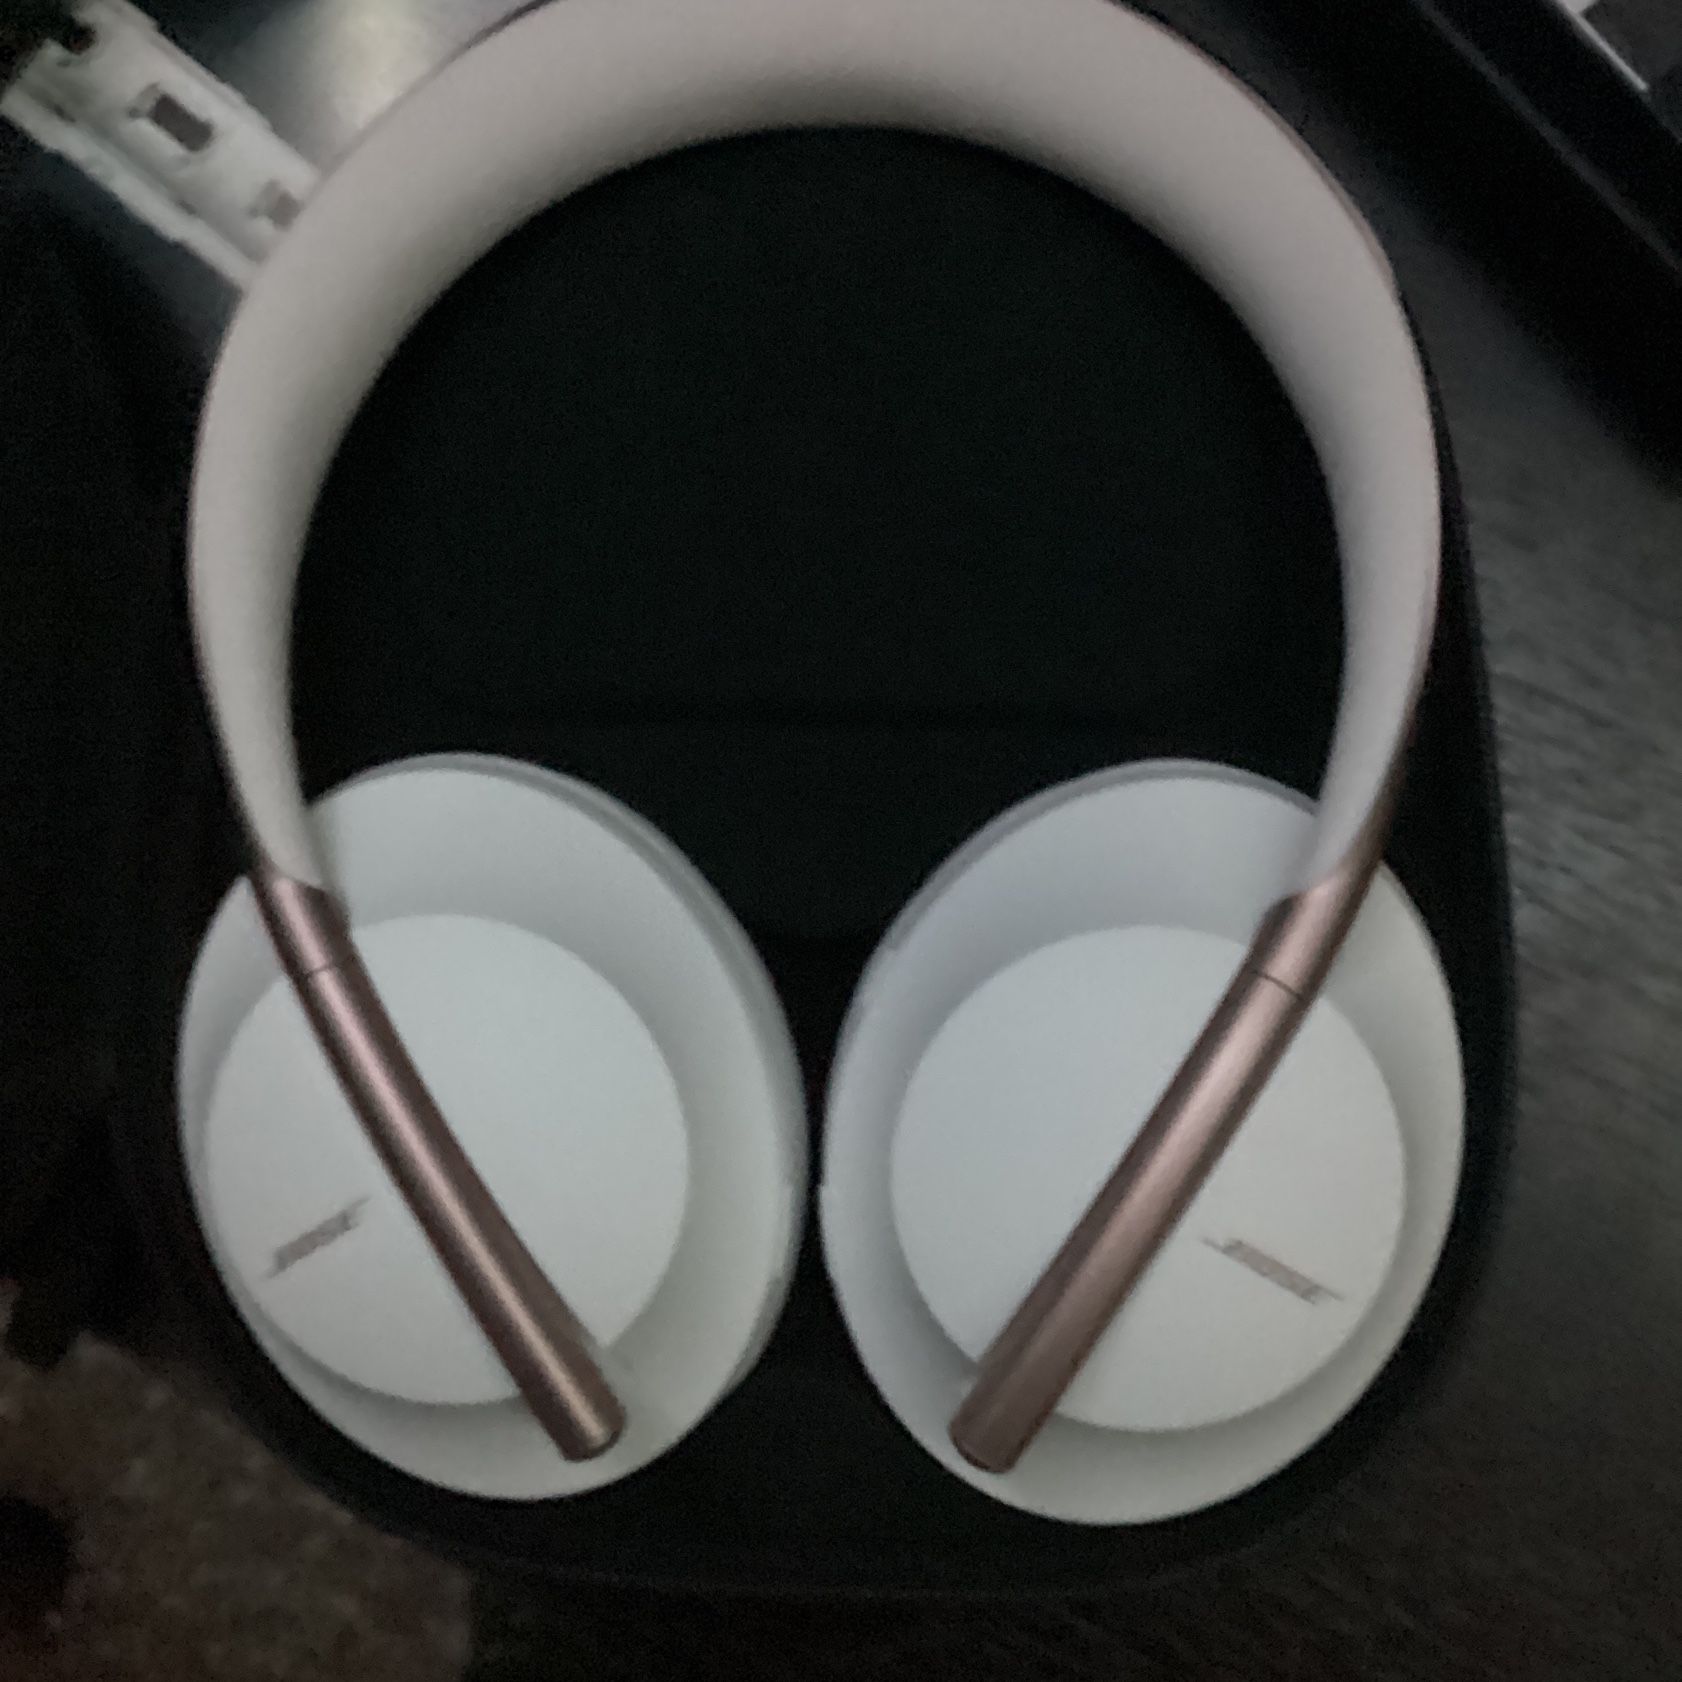 Bose Noise Cancelling 700 Headphones for Sale in Mesa, AZ - OfferUp